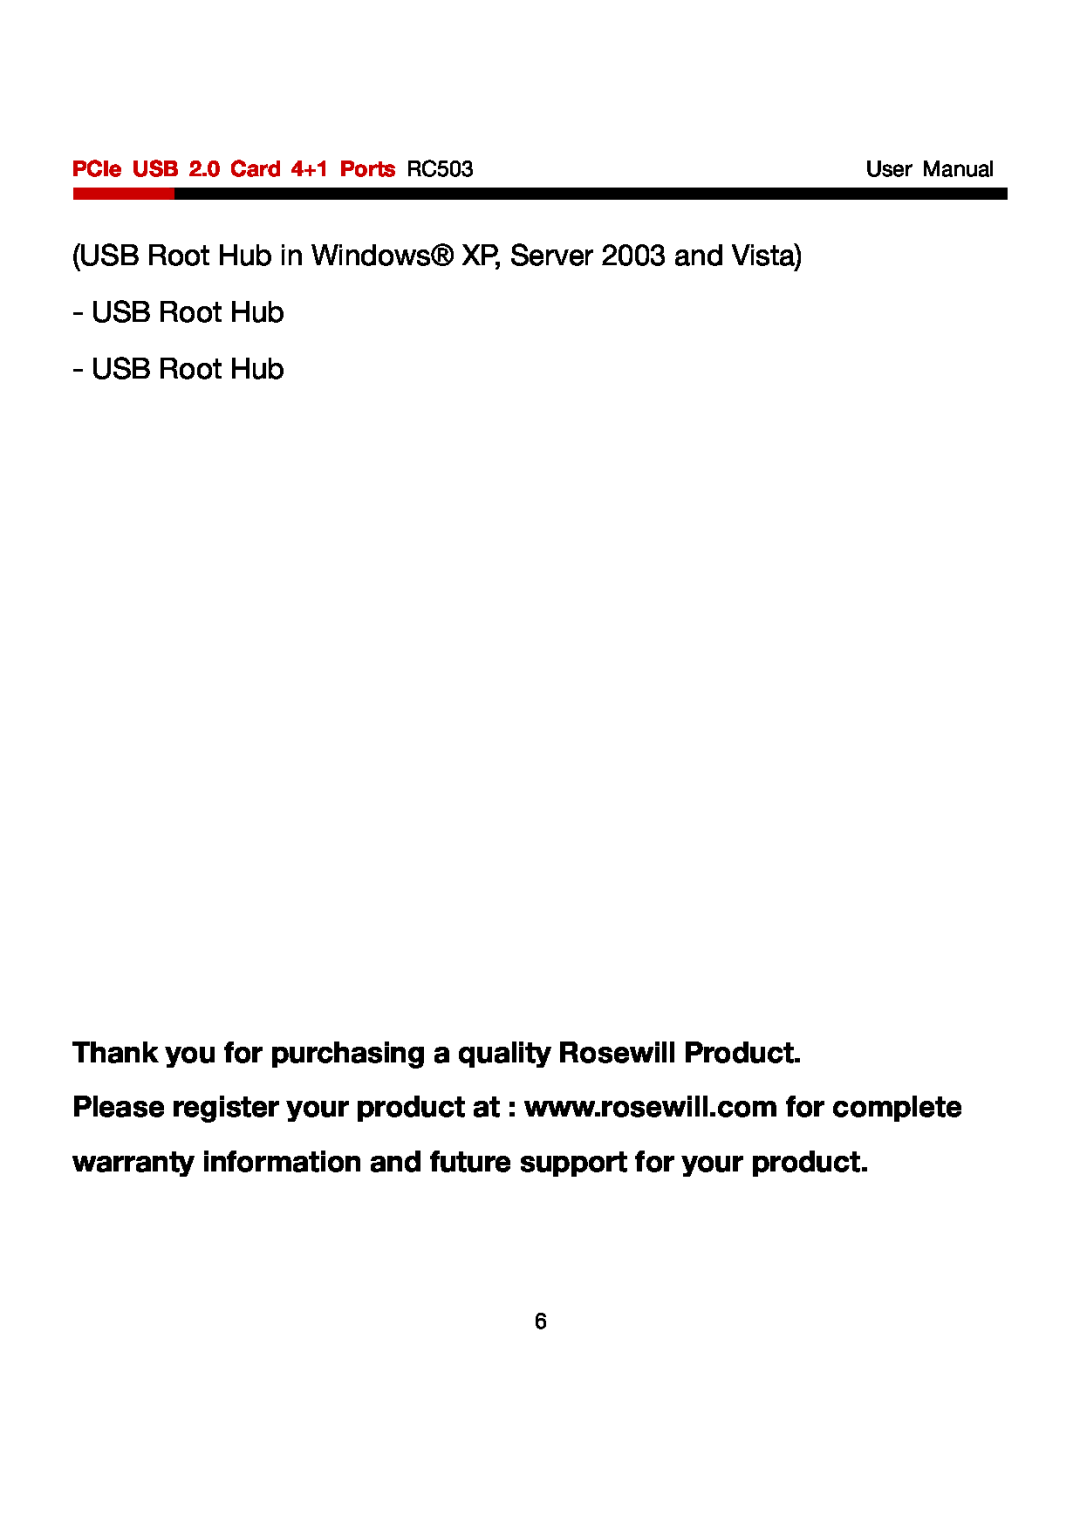 Rosewill Thank you for purchasing a quality Rosewill Product, USB Root Hub, PCIe USB 2.0 Card 4+1 Ports RC503 